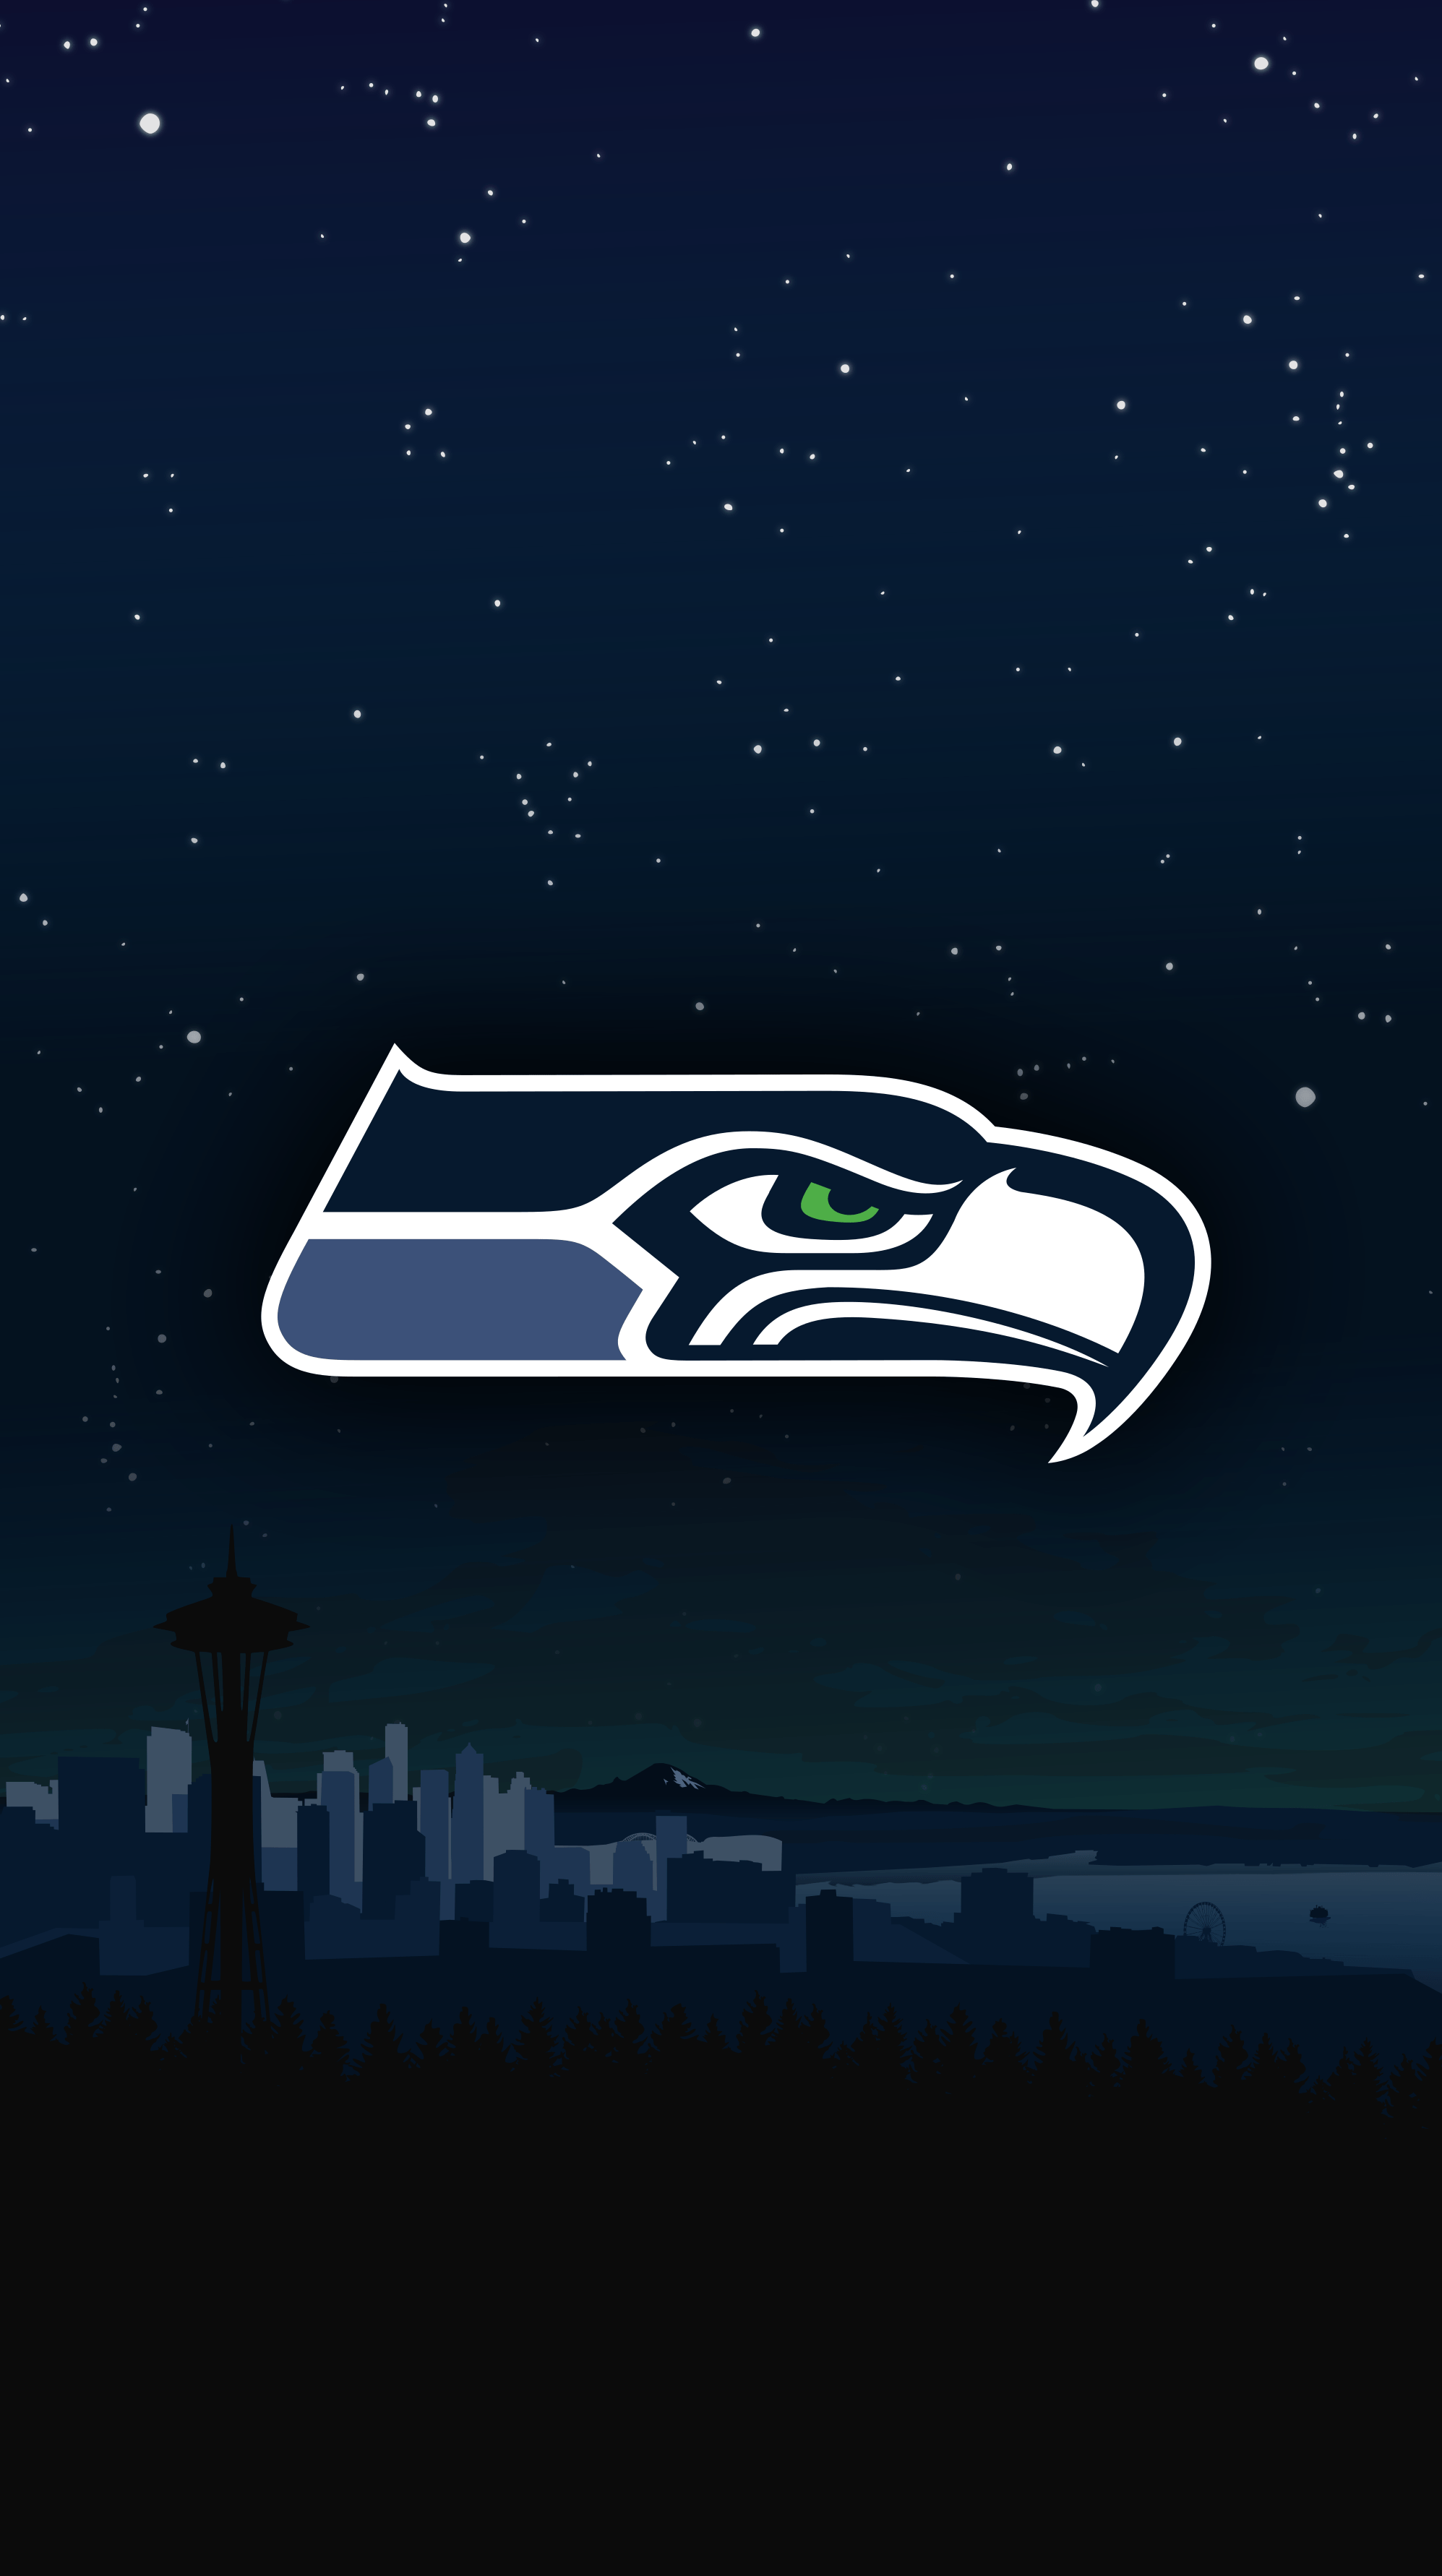 I Made A Skyline Mobile Wallpaper For R SeattleWA, I Thought